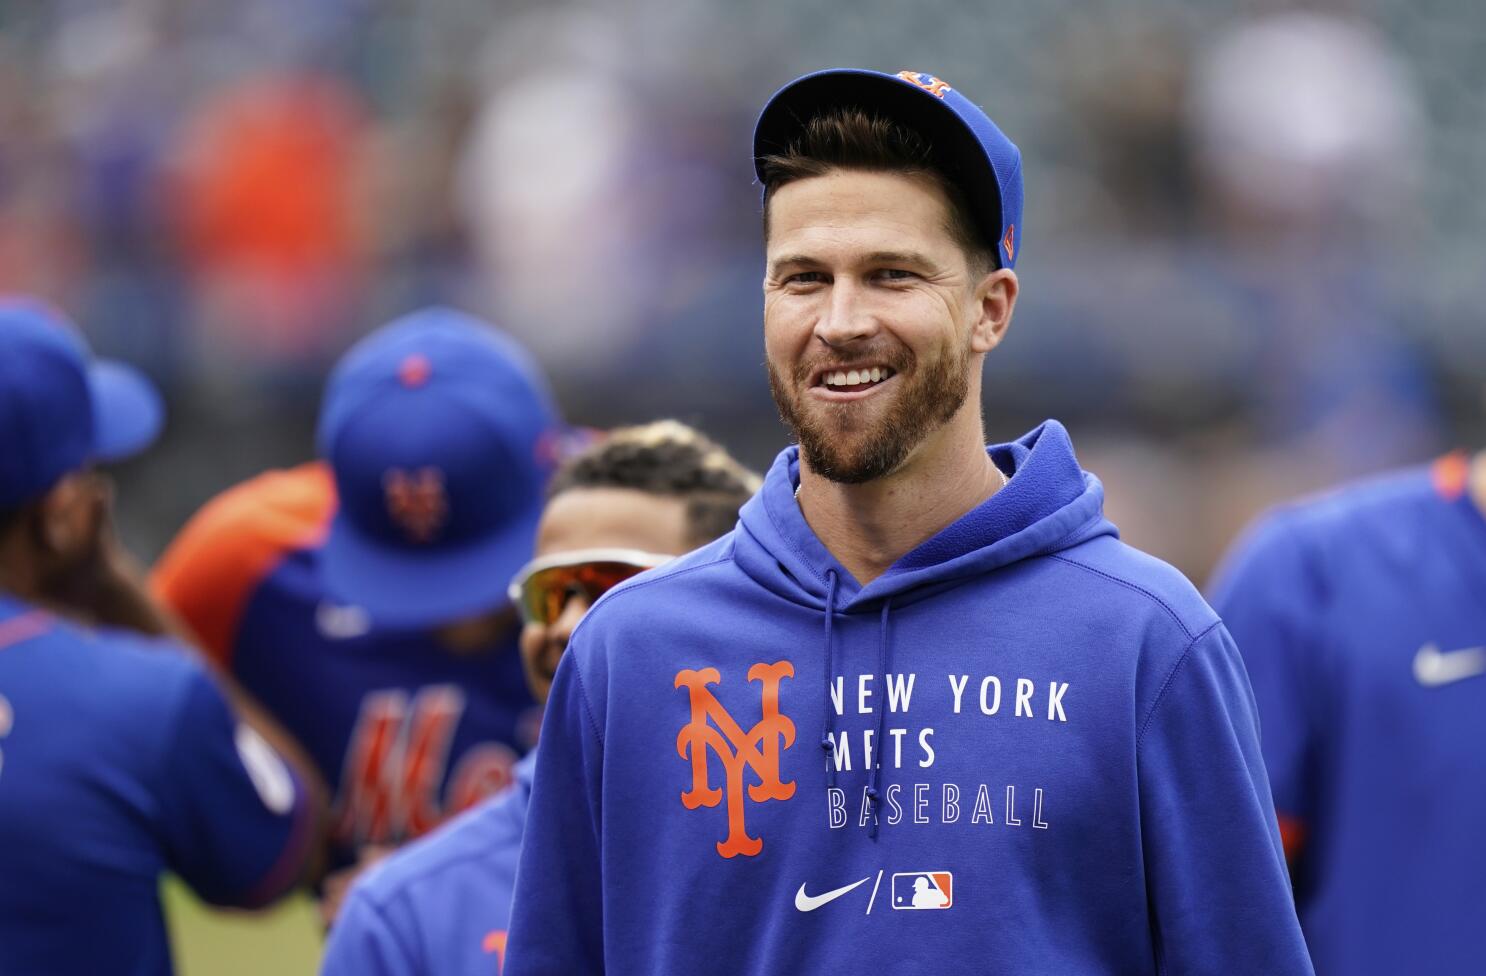 It's Time to Buy Back In to the New York Mets